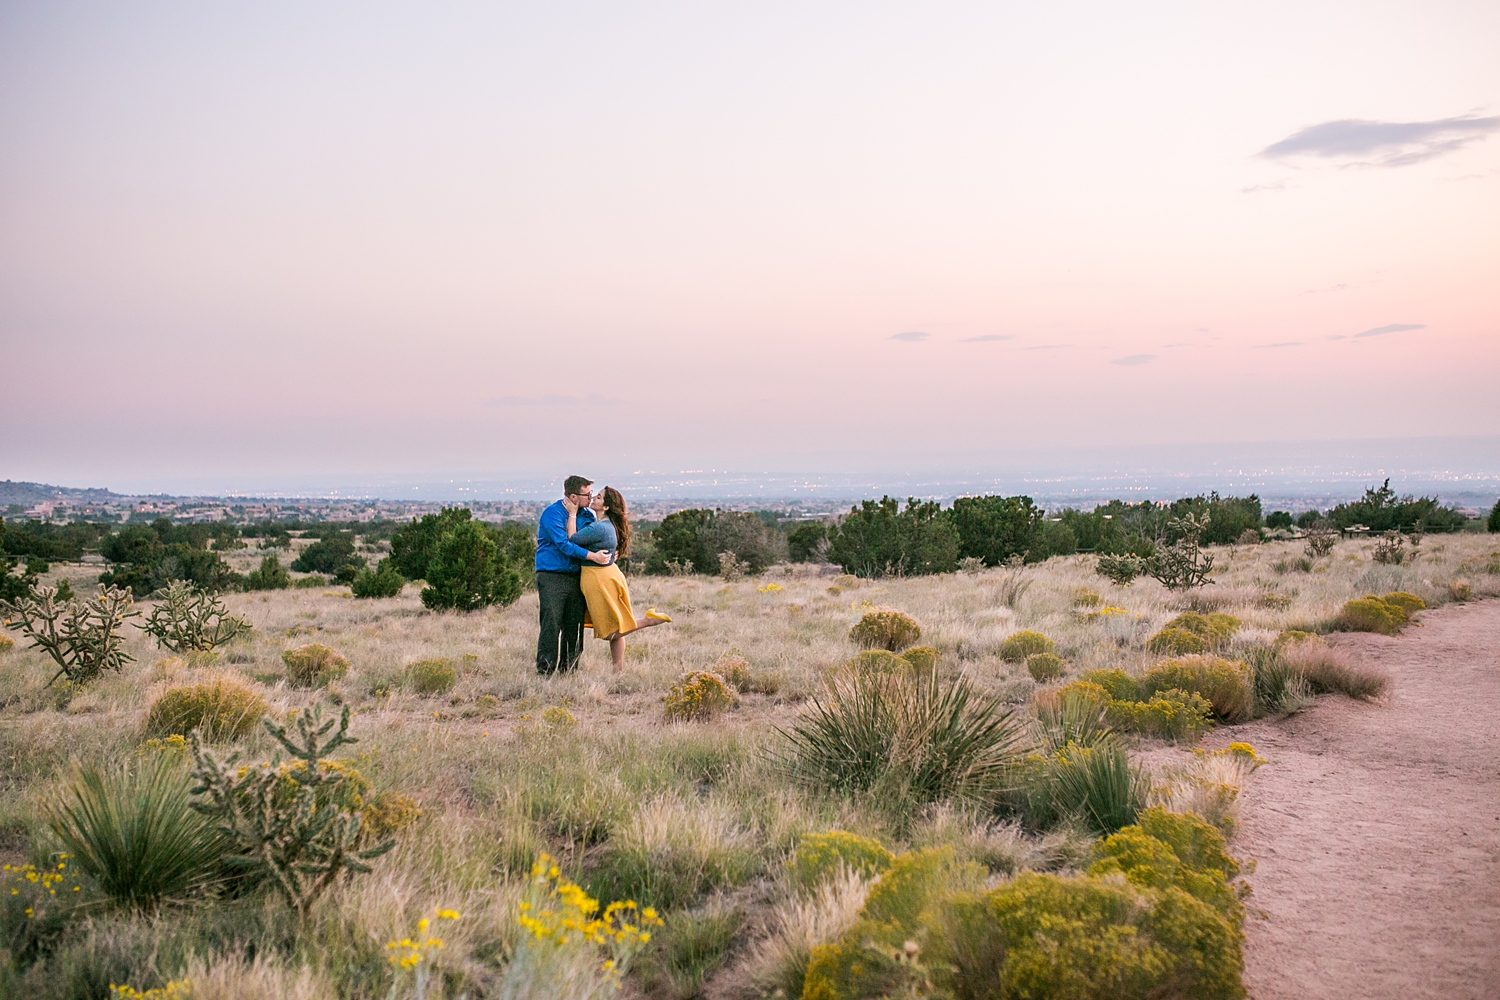 Style tips for amazing engagement pictures: coordinate your colors.